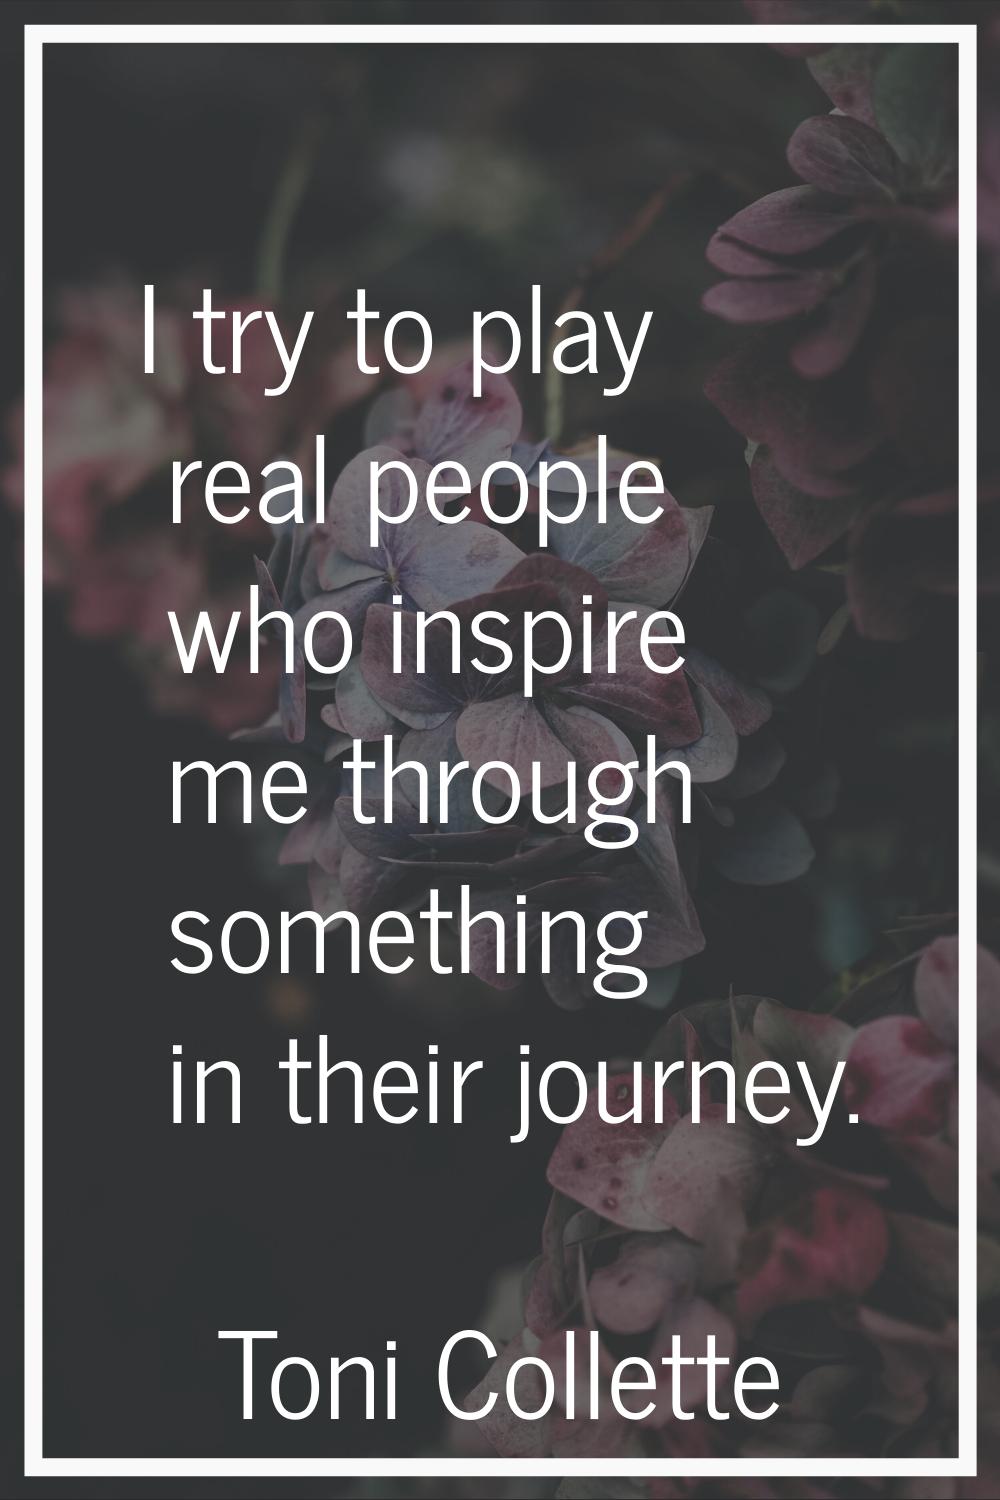 I try to play real people who inspire me through something in their journey.